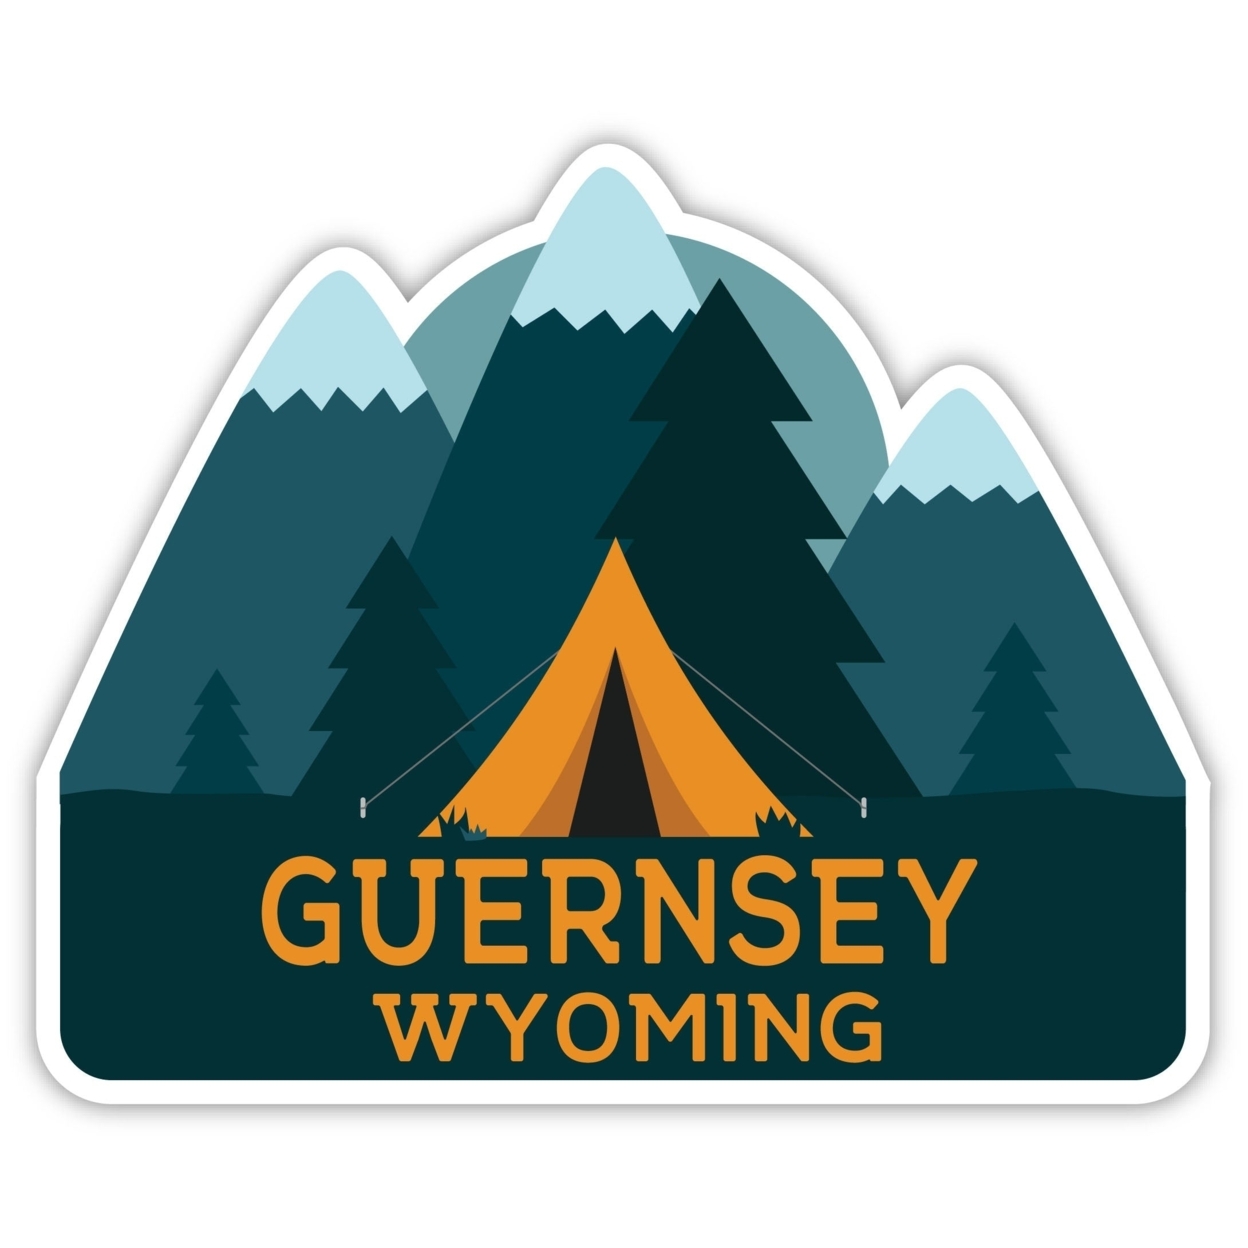 Guernsey Wyoming Souvenir Decorative Stickers (Choose Theme And Size) - 4-Pack, 2-Inch, Tent